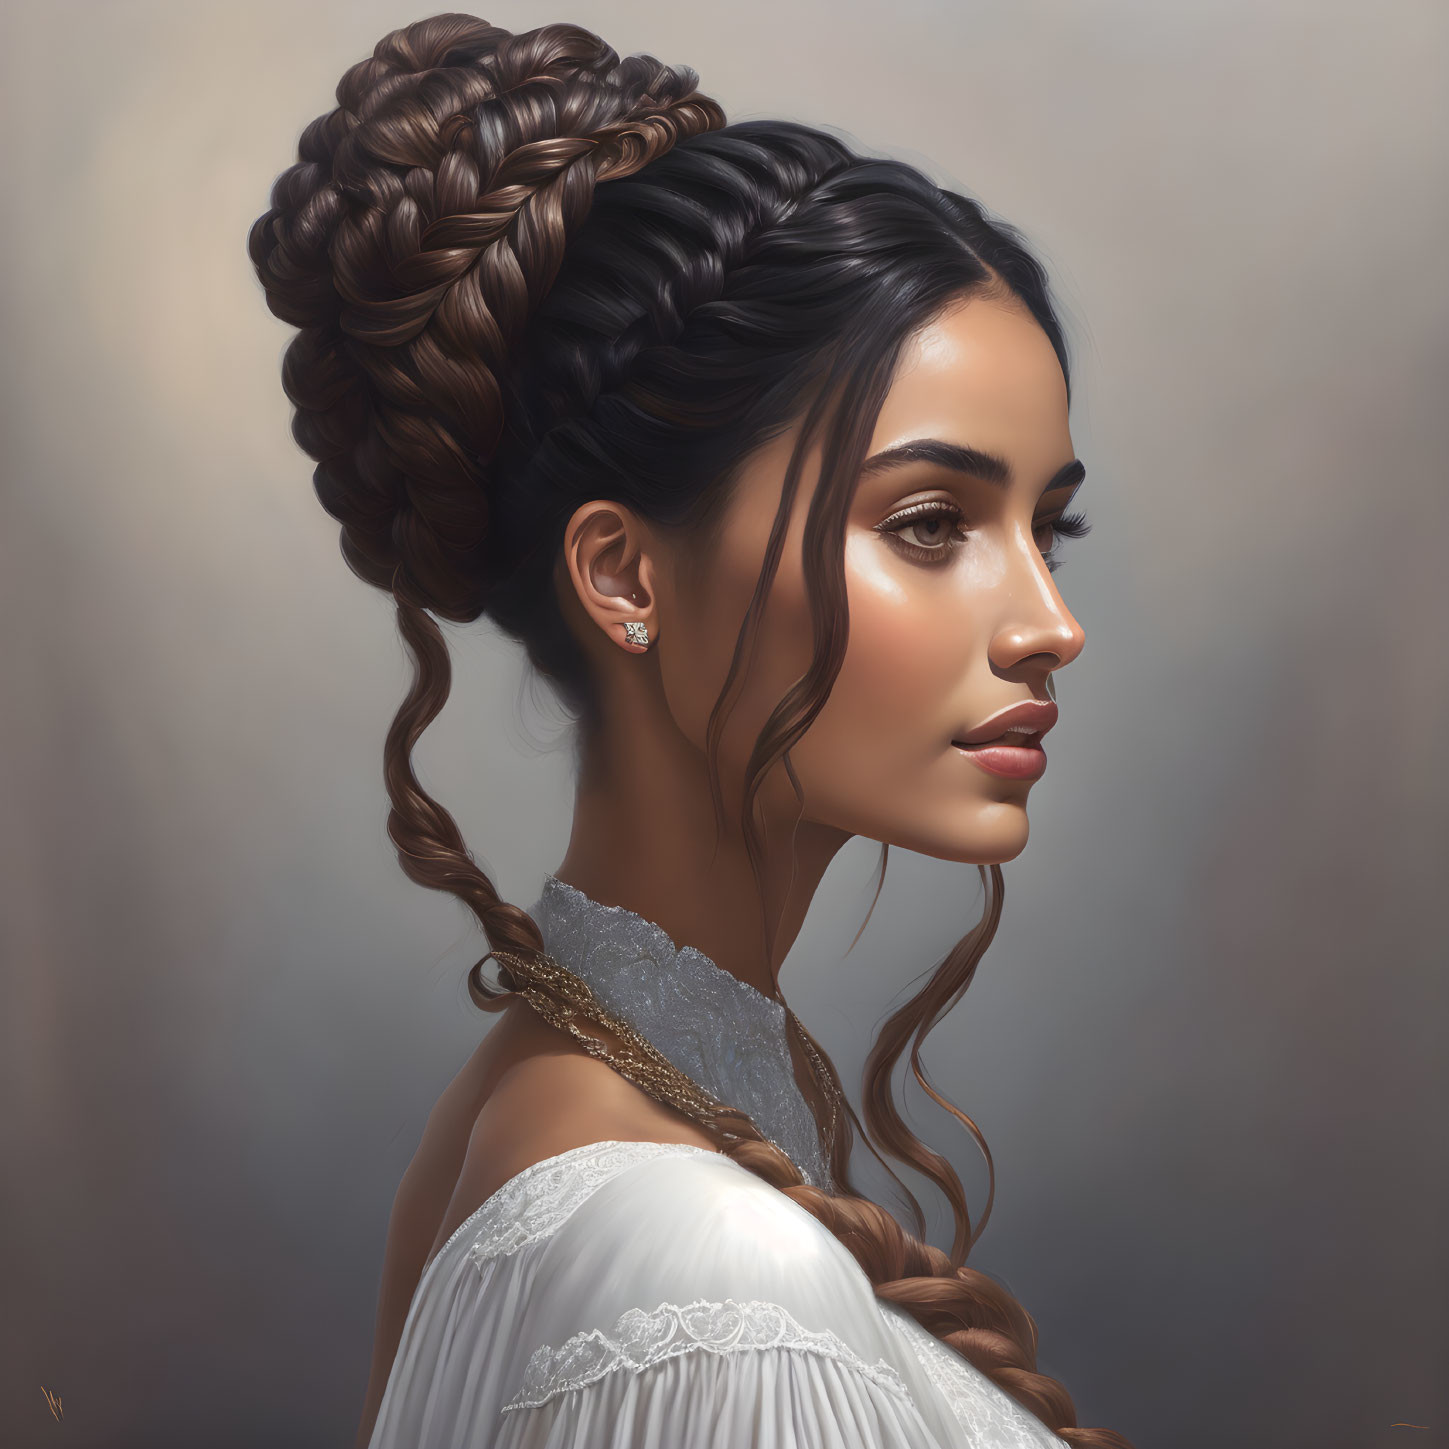 Woman with Intricate Braided Updo in White Dress and Earring